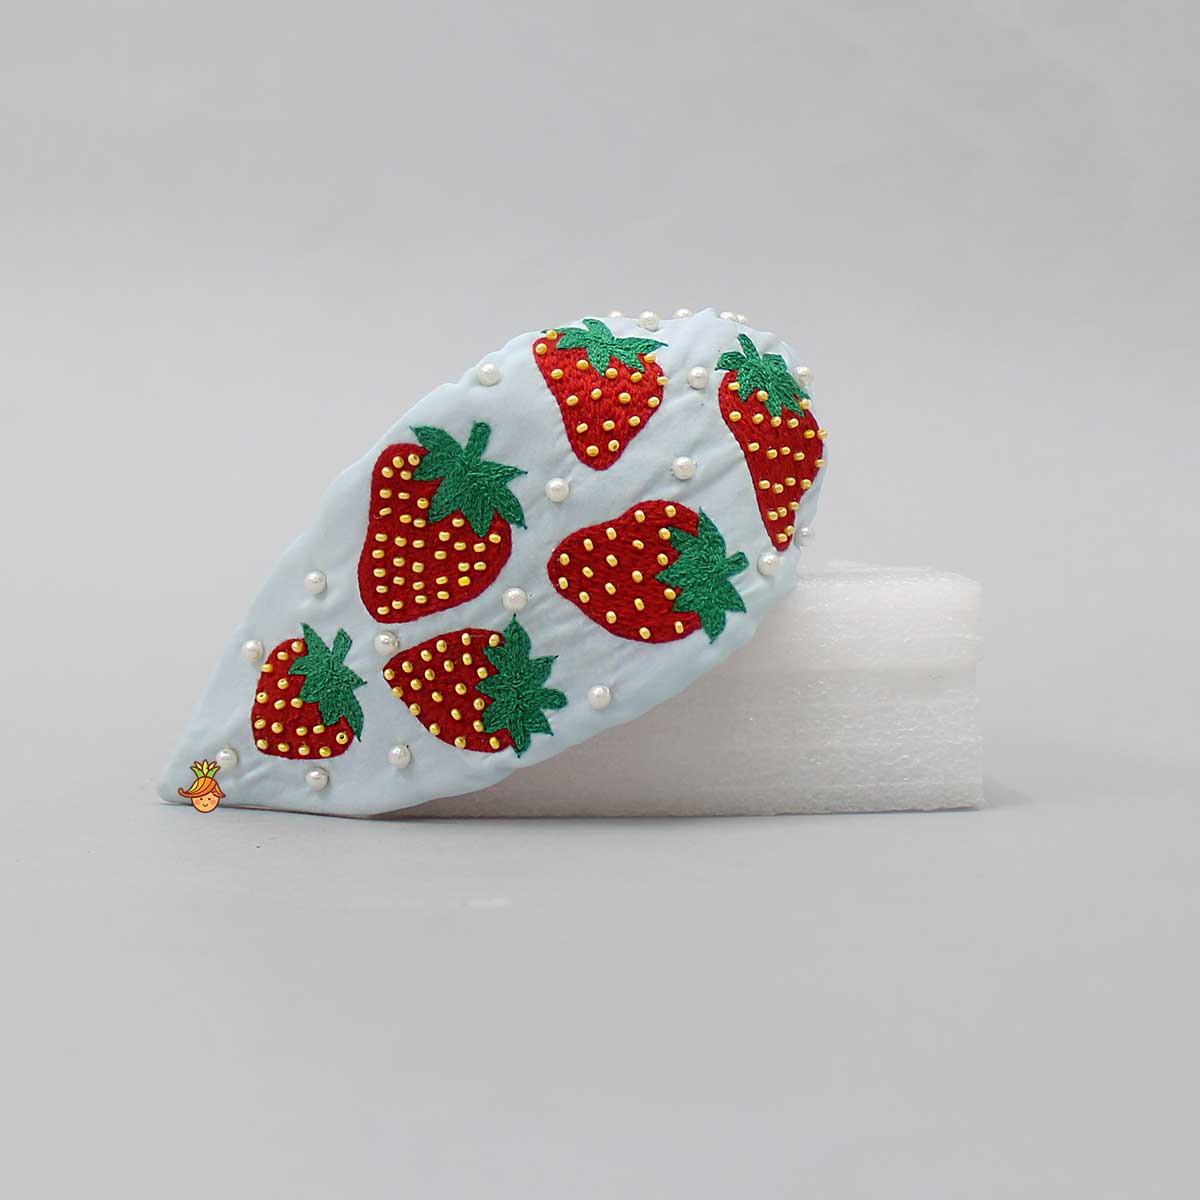 Strawberry Embroidered Hairband